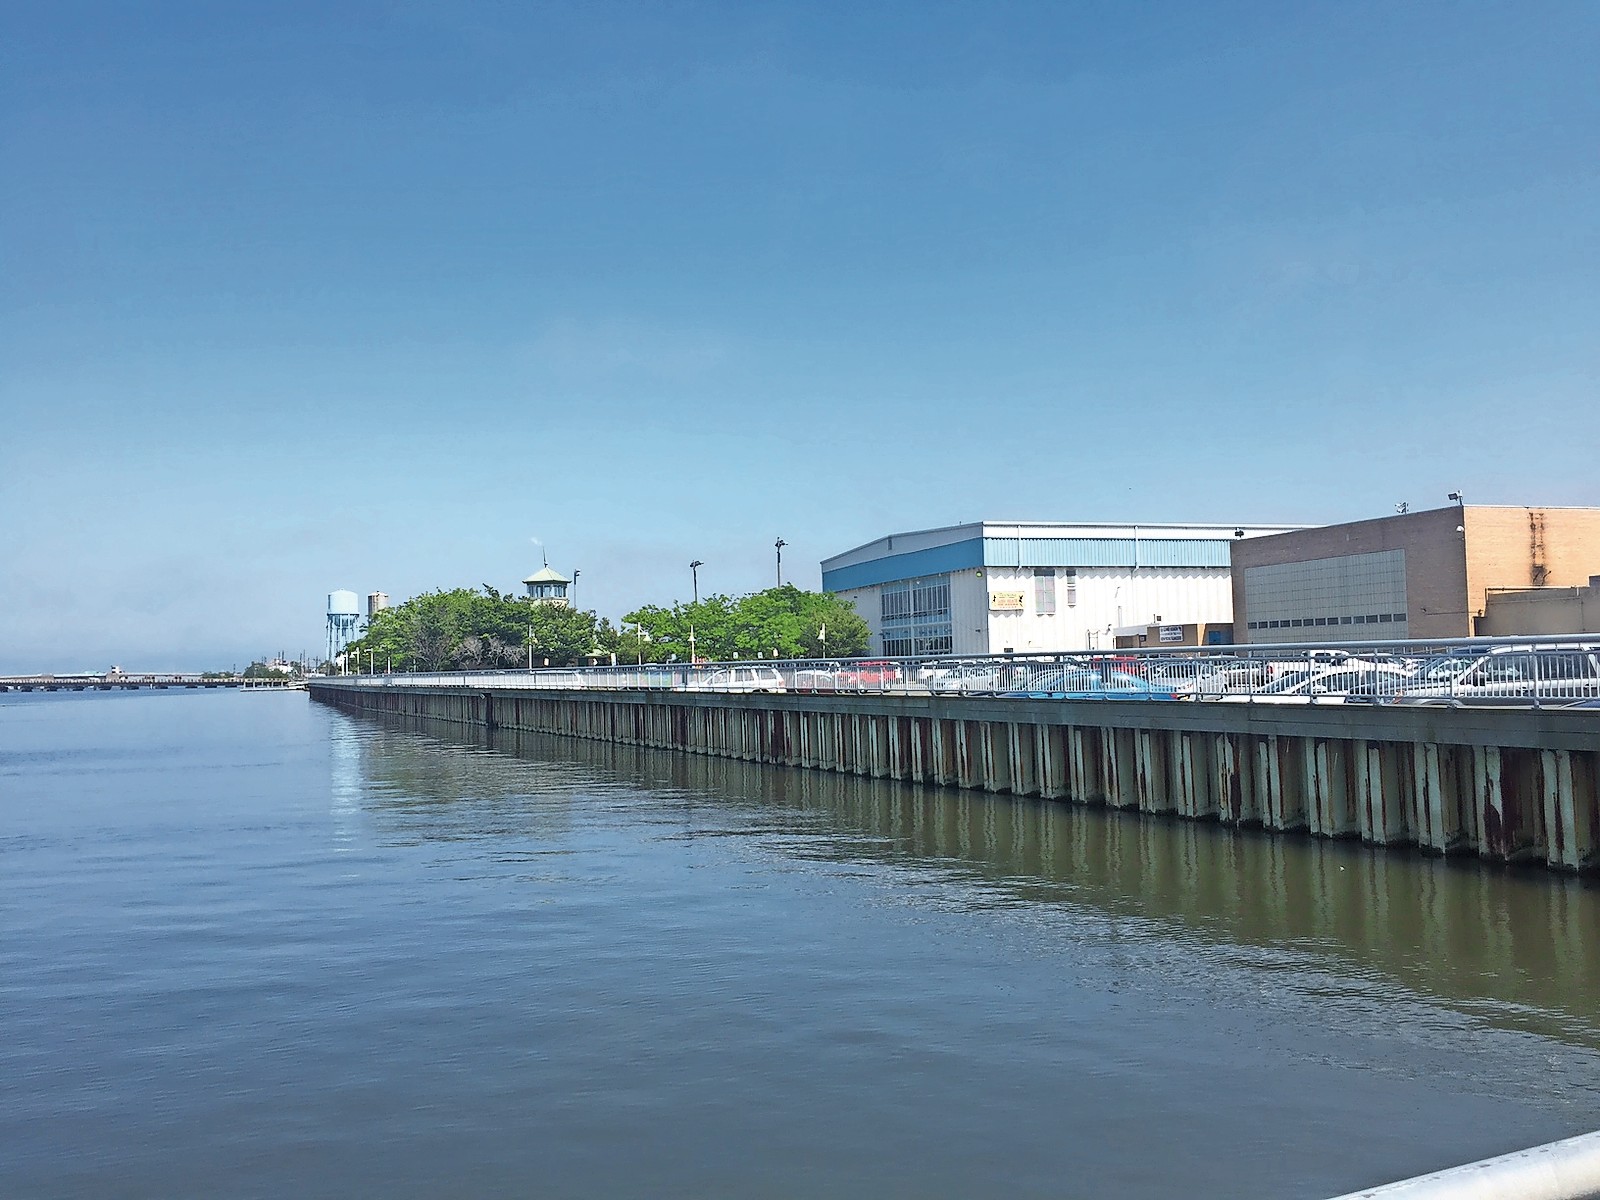 Sunset Bay said it is looking to install a floating dock and establish water taxi and recreational services near the Rec Center, at no cost to the city.